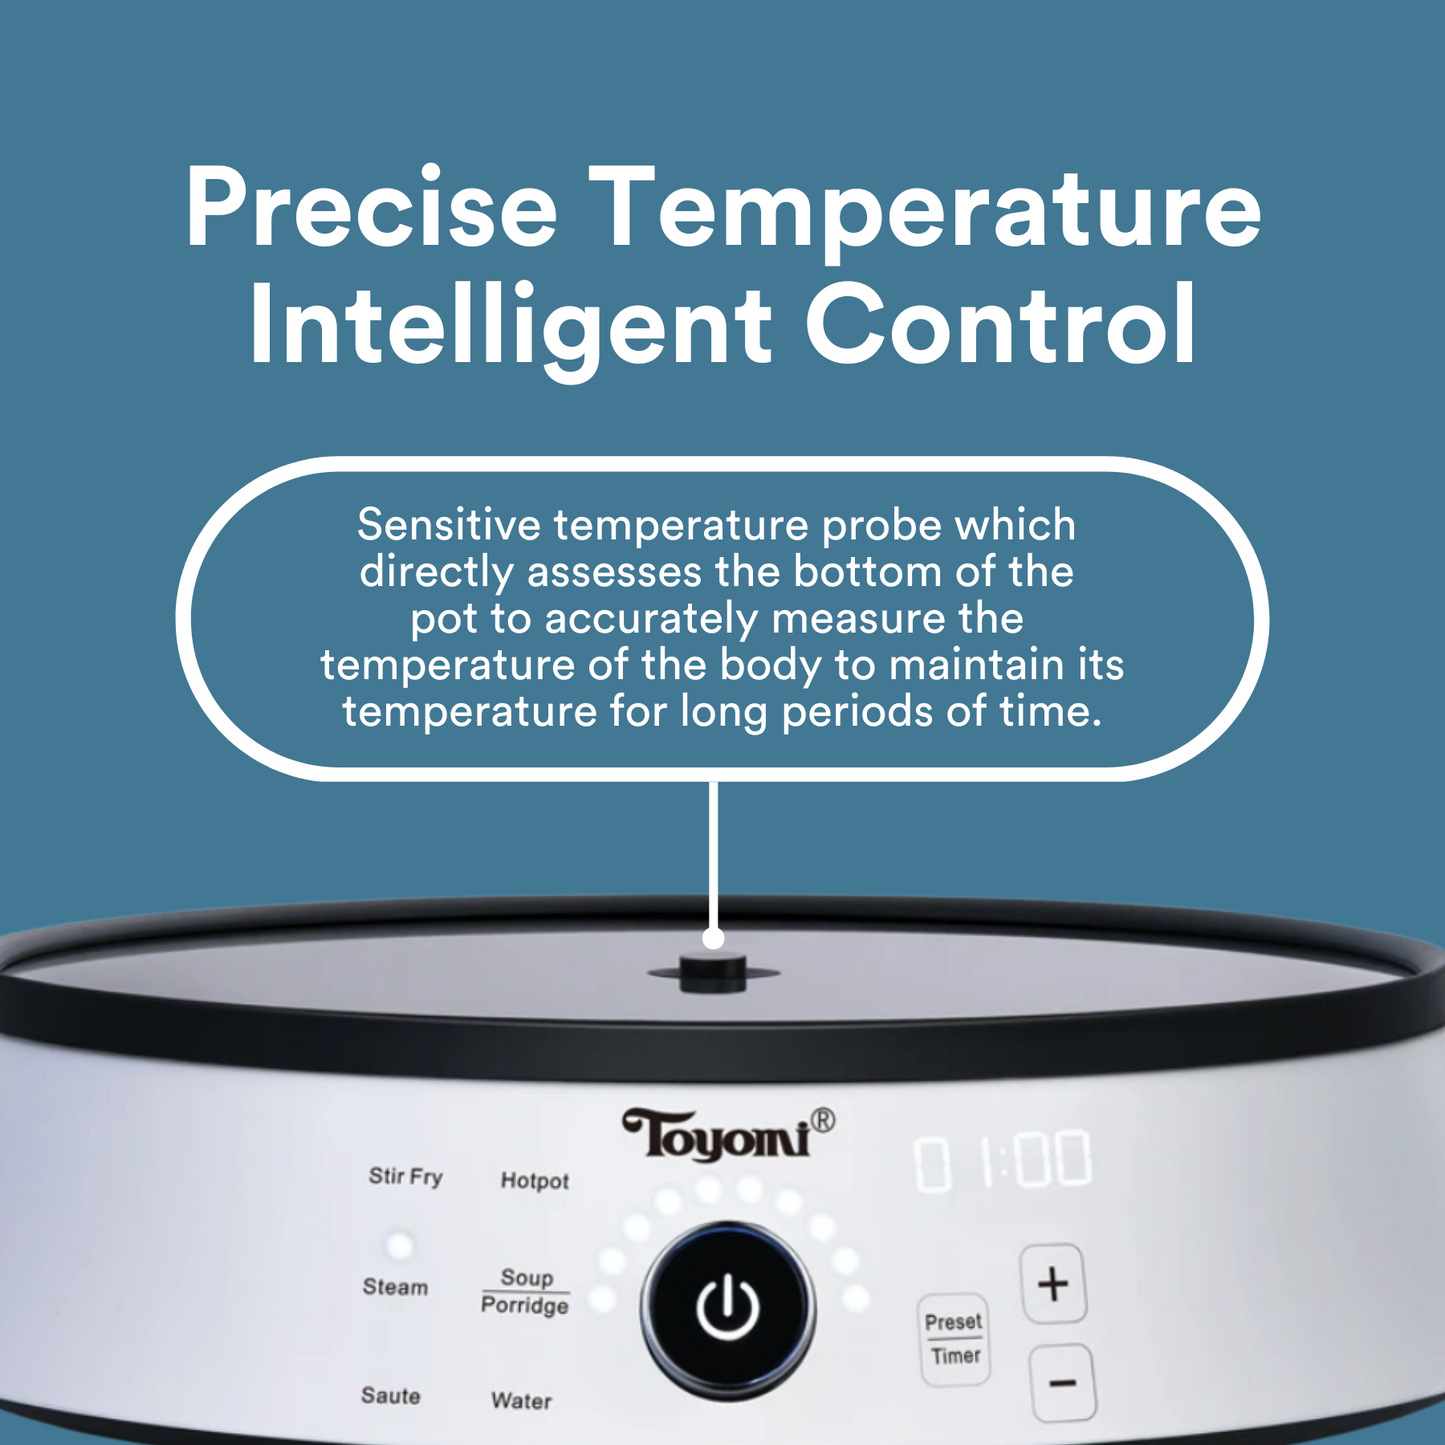 Load image into Gallery viewer, TOYOMI Precise Temperature Intelligent Control Induction Cooker IH 03J02 - TOYOMI
